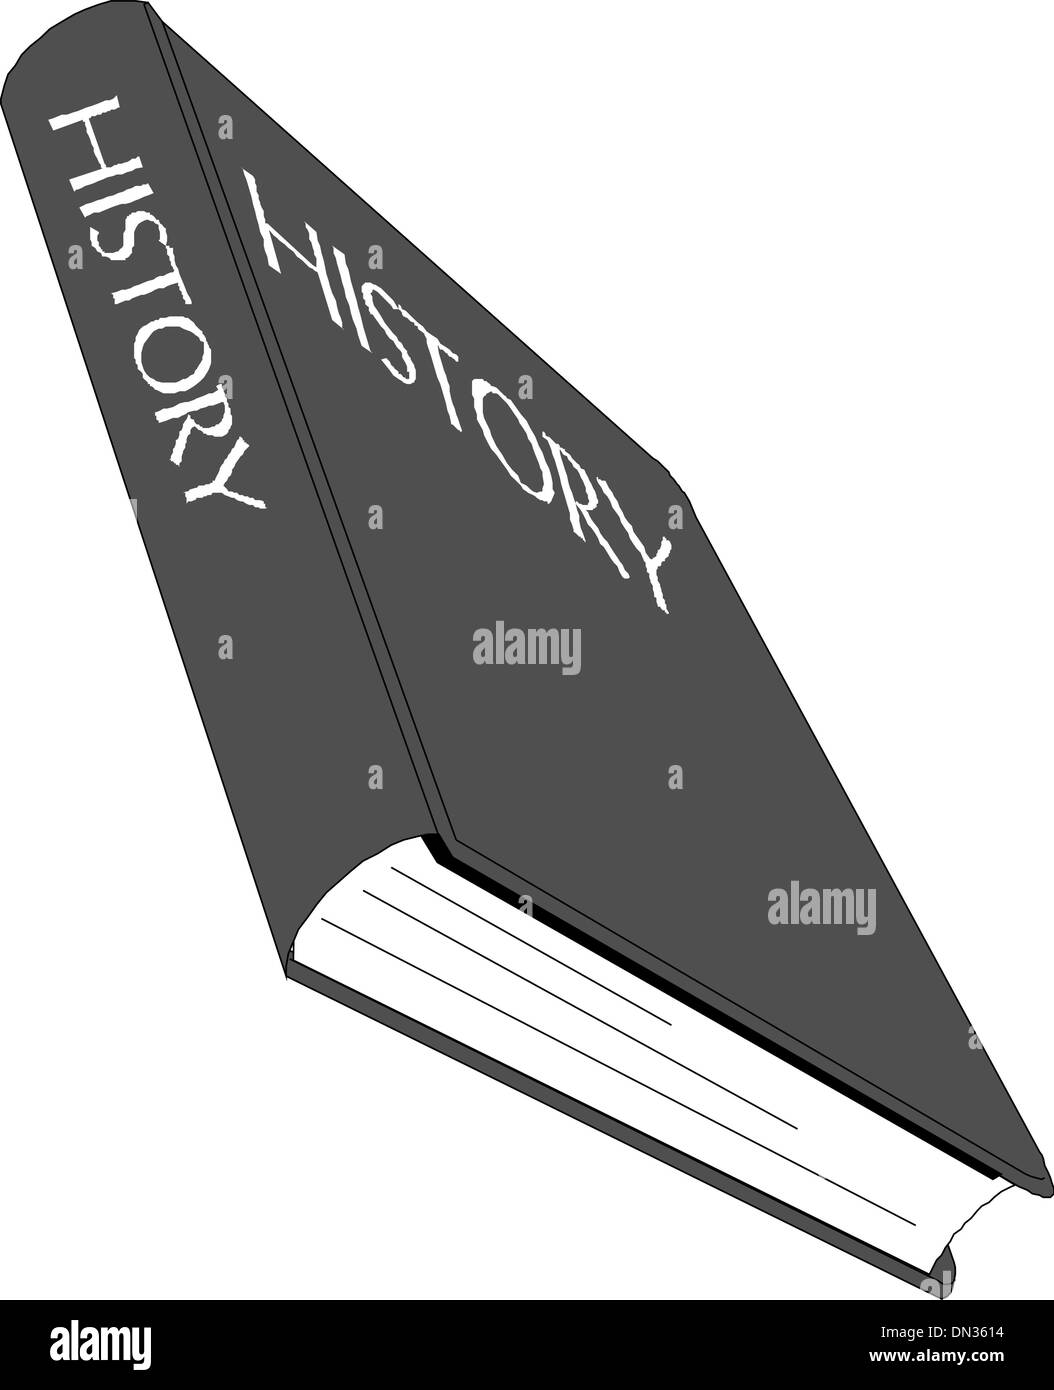 Hardcover book-History Stock Vector